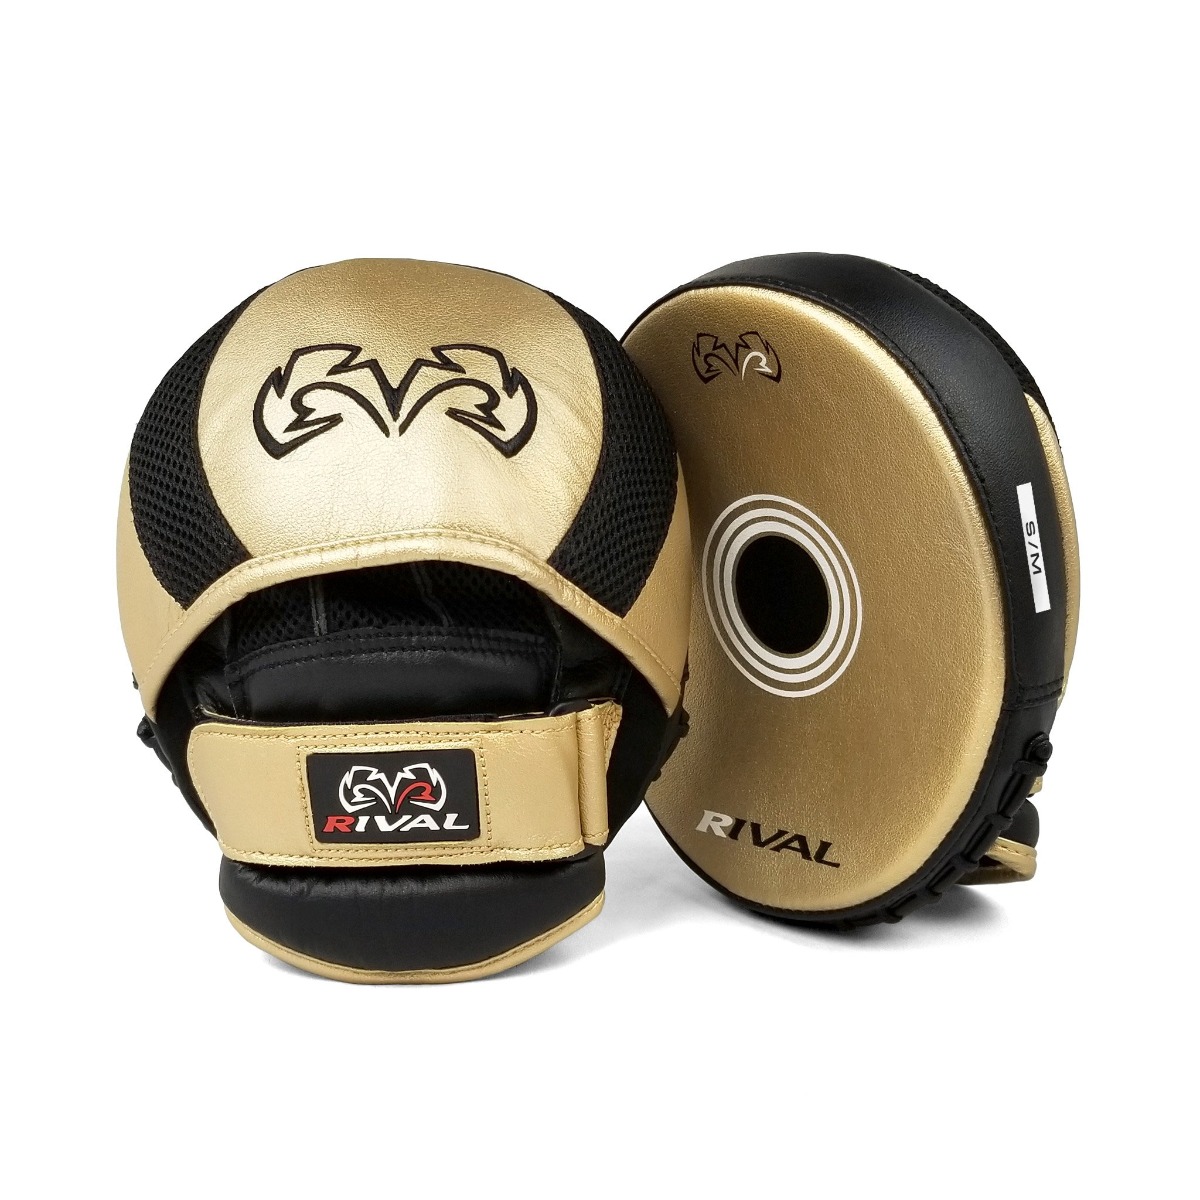 RIVAL RPM11 EVOLUTION PUNCH MITTS-0